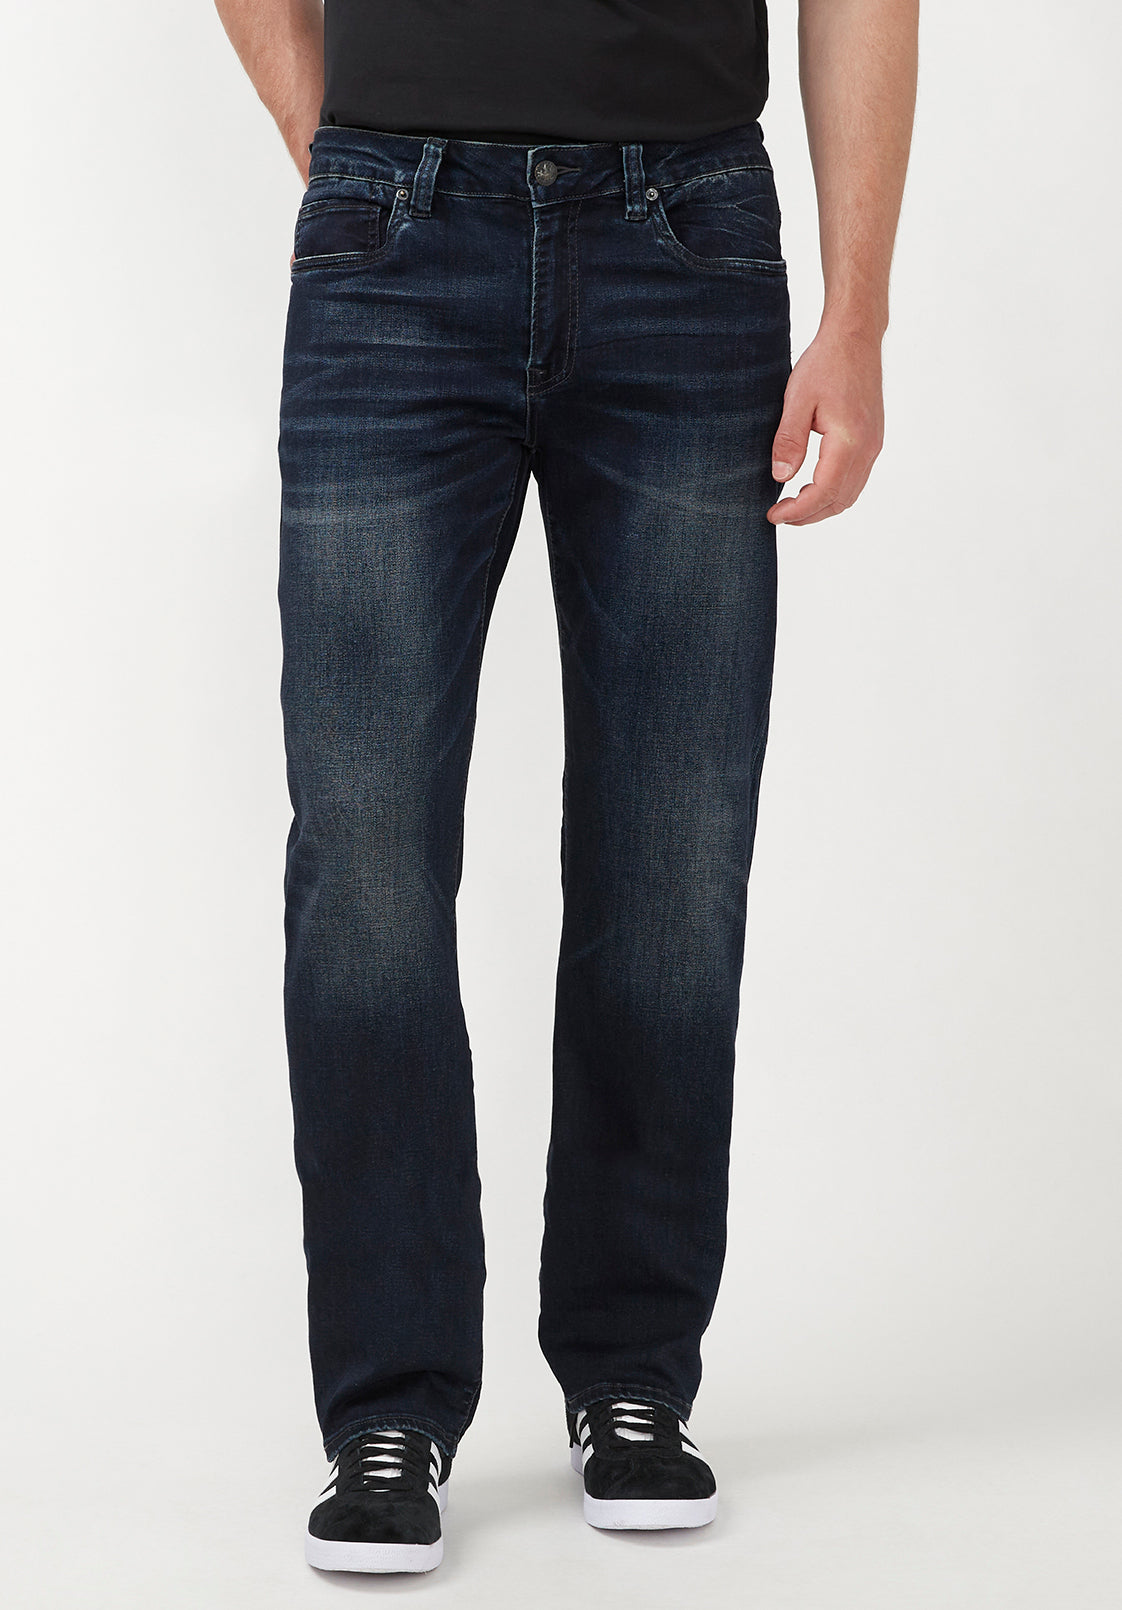 Relaxed Straight Driven Men's Jeans in Authentic Indigo - BM22137 ...